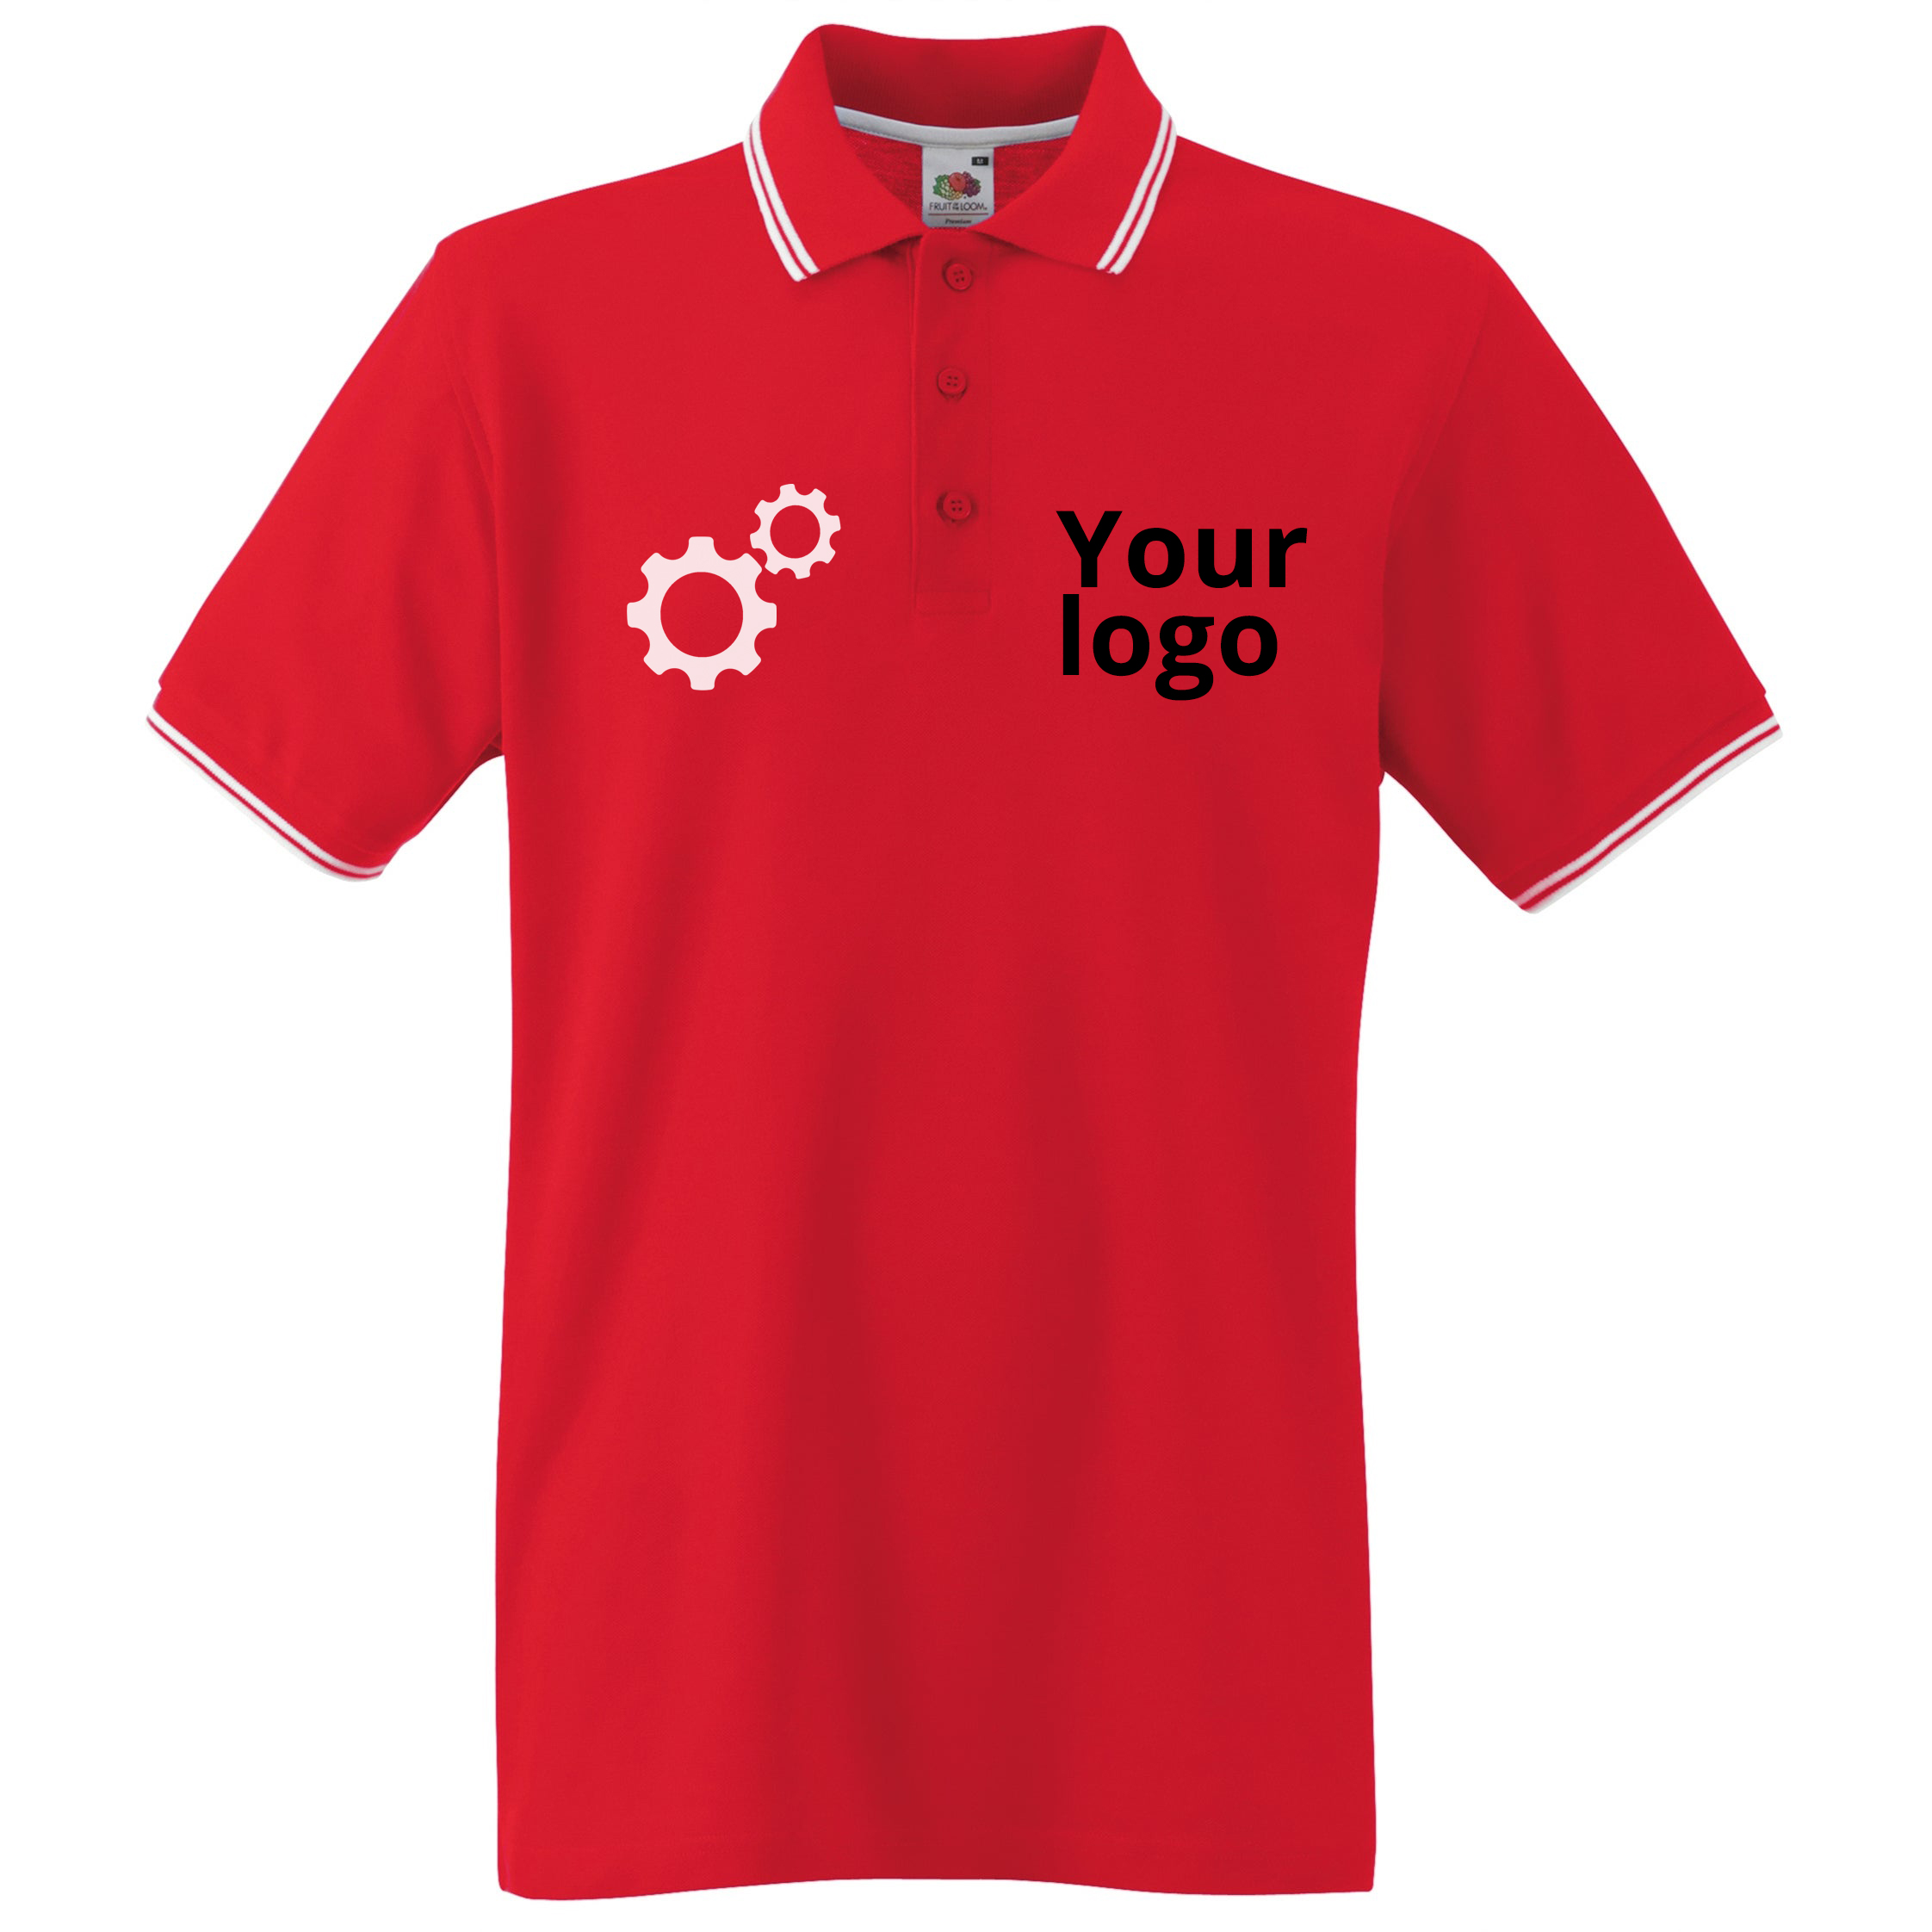 637425185785307470_httpswebsystems.s3.amazonaws.comtmp_for_downloadtipped-polo-red-white-logo.jpg